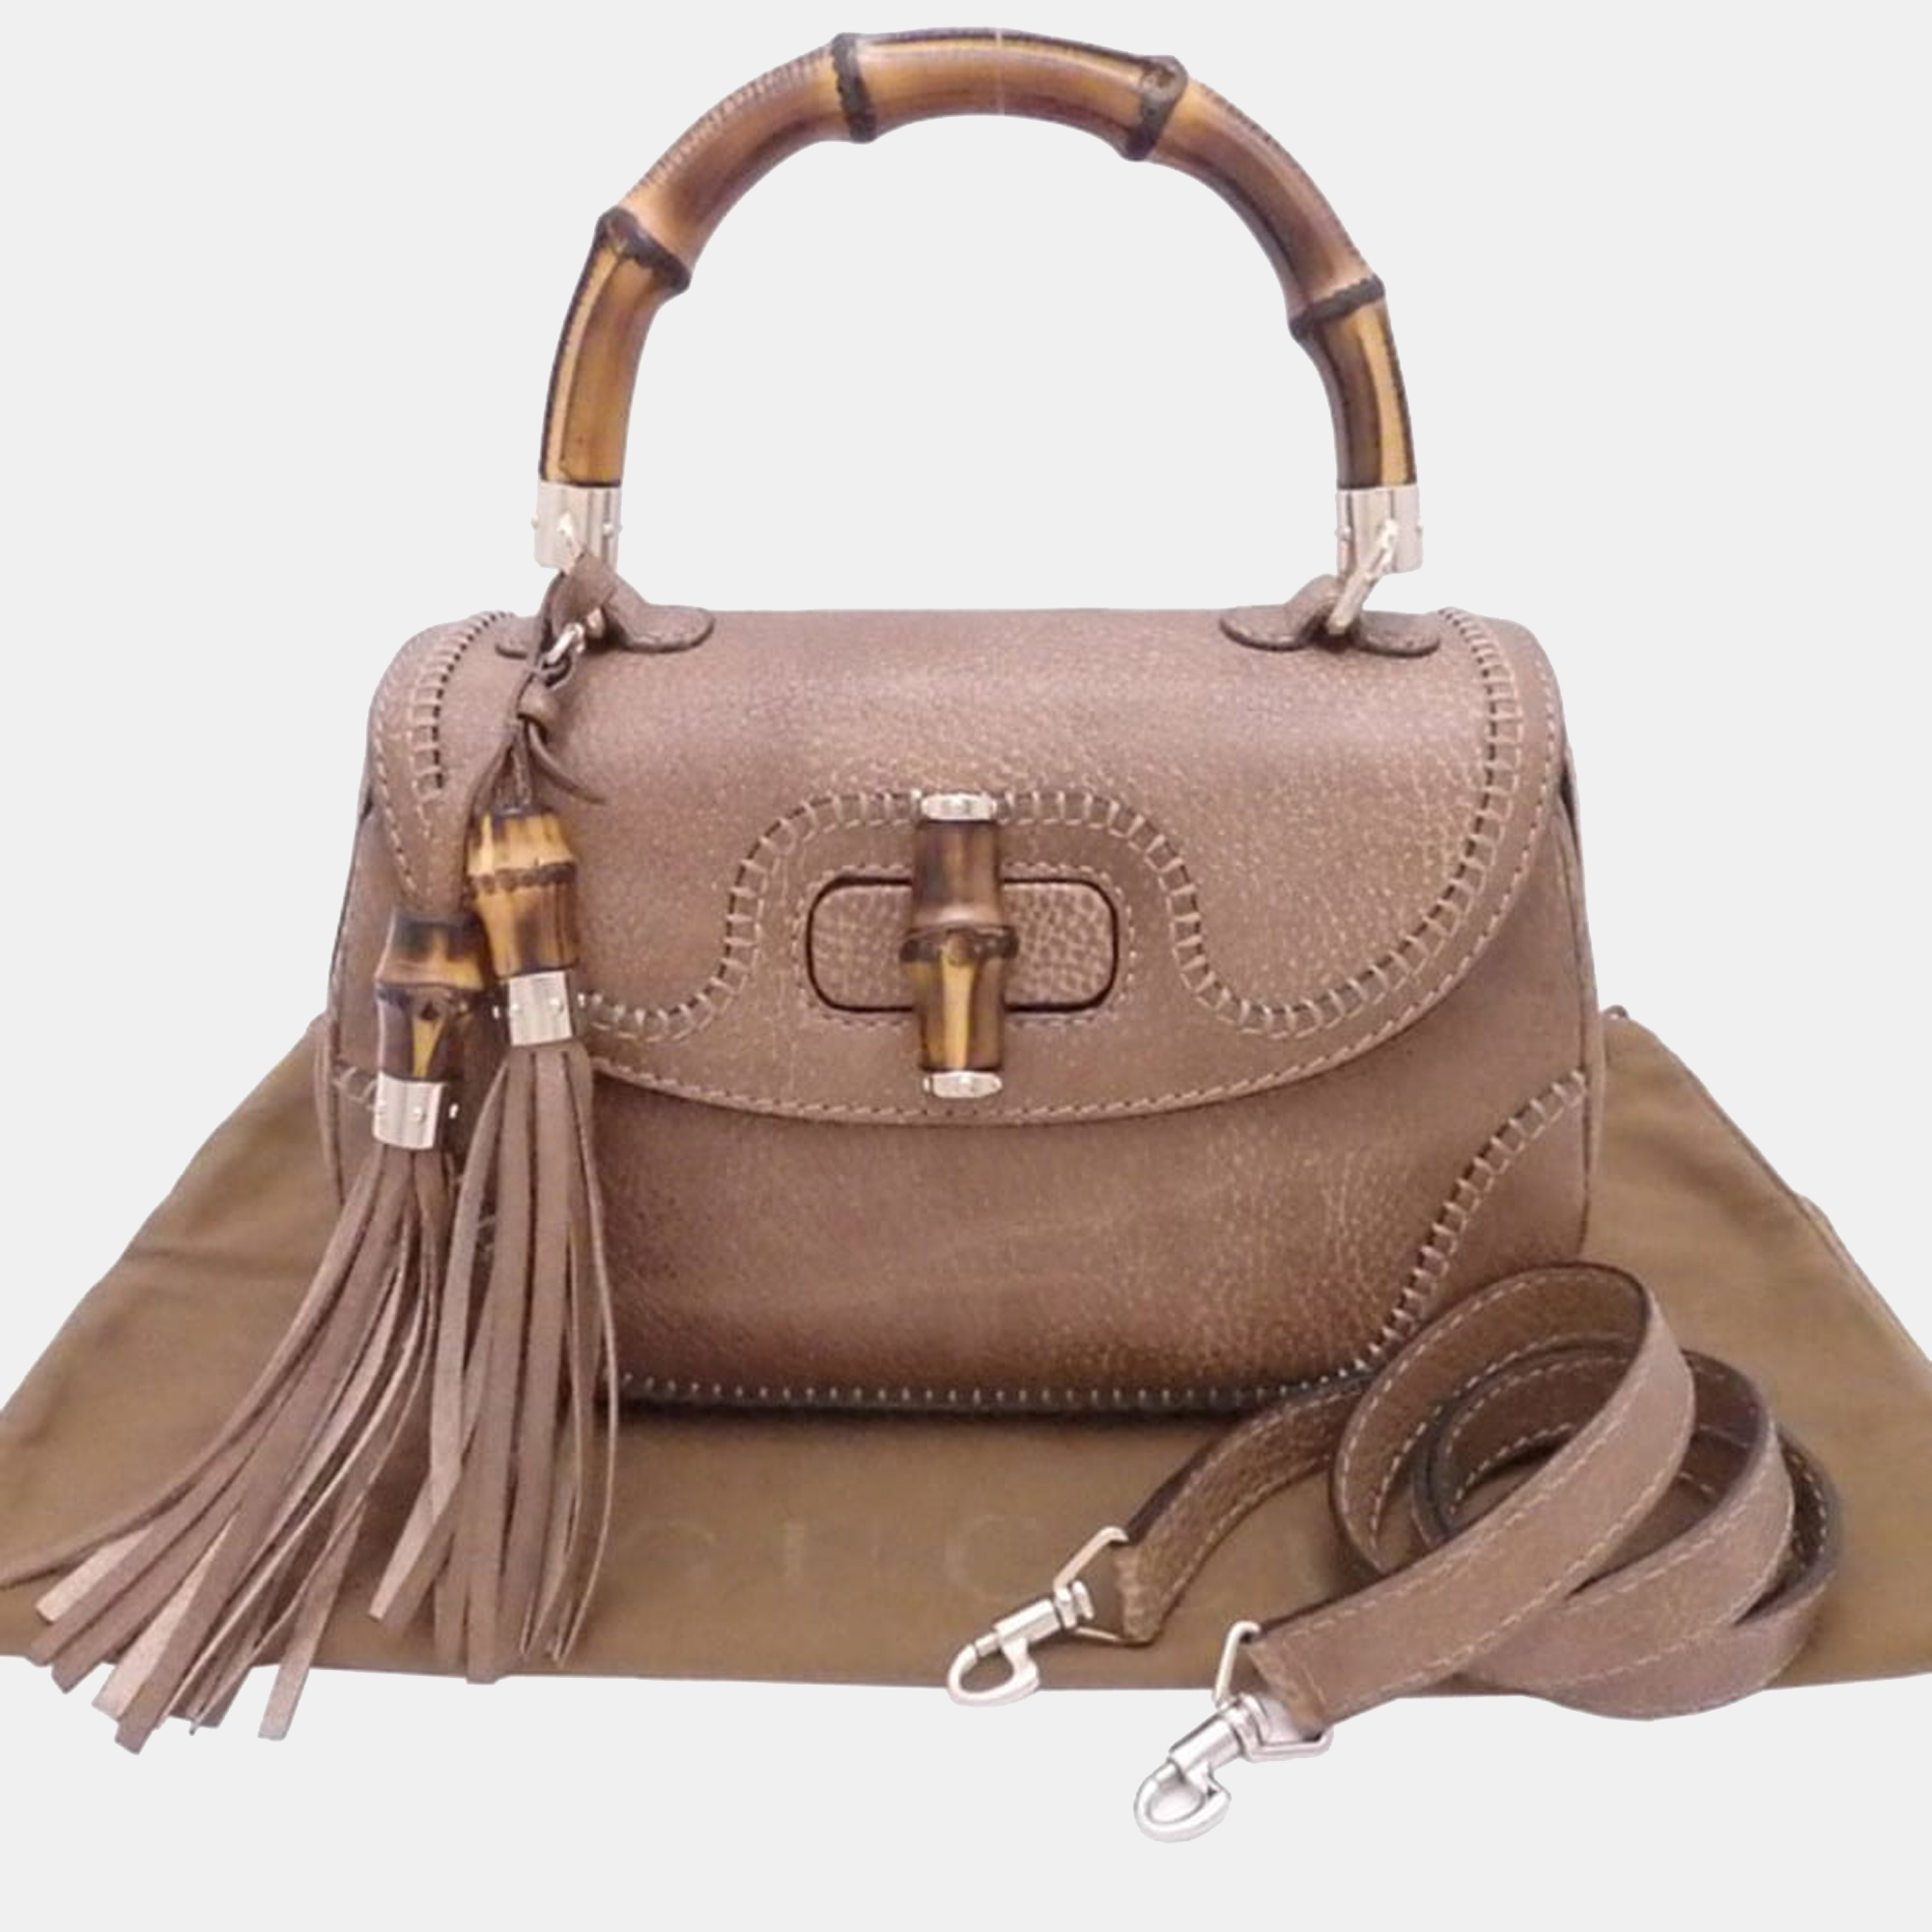 Gucci Brown Leather New Bamboo Top Handle Bag